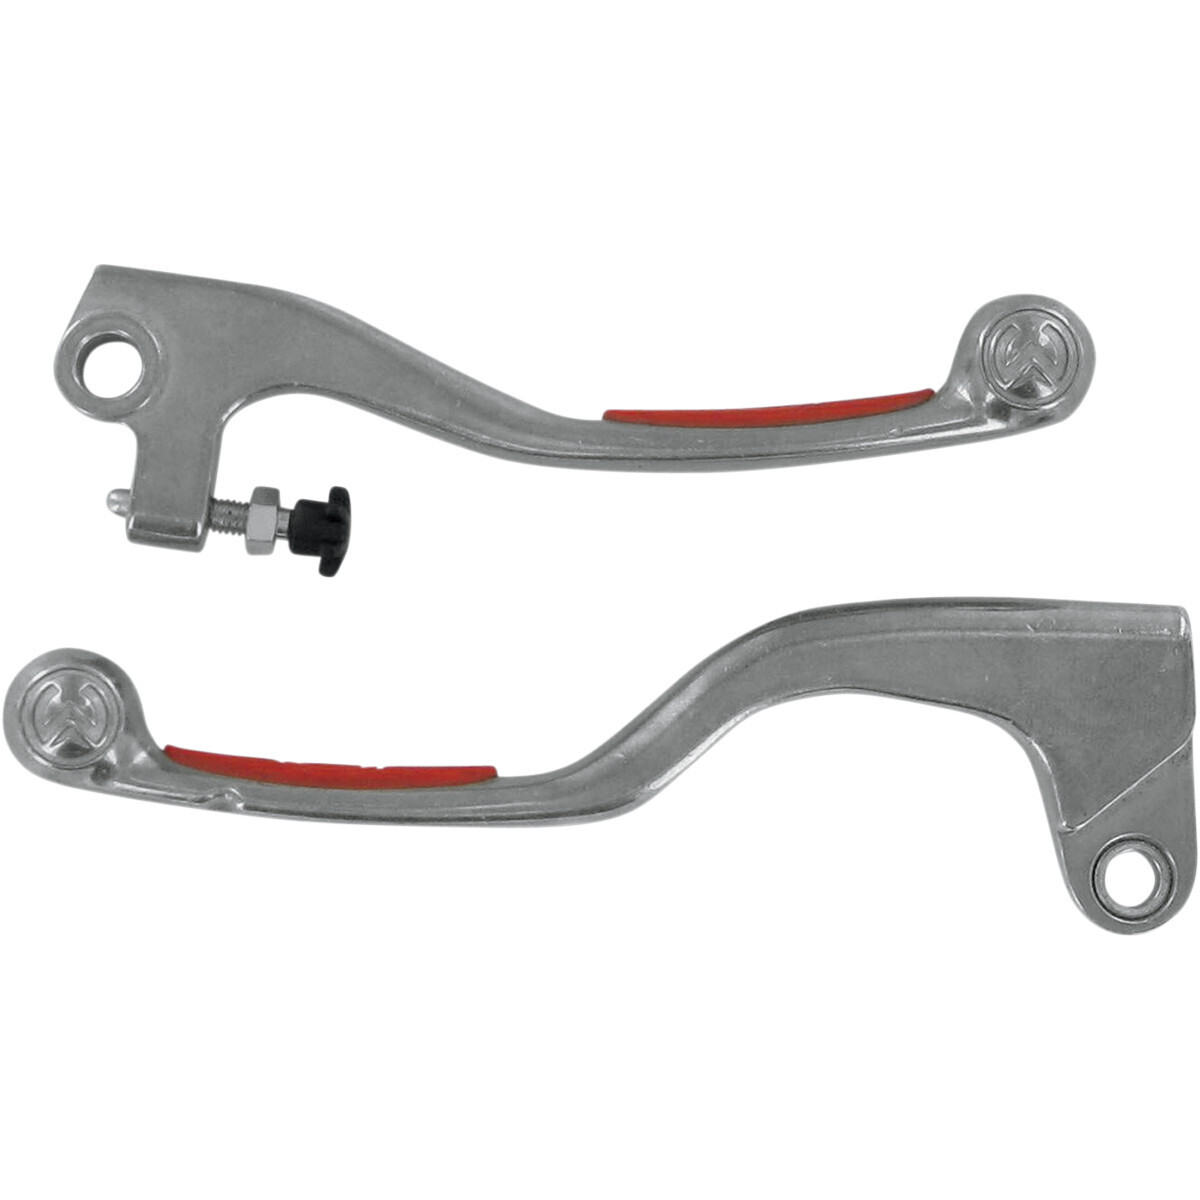 MOOSE RACING
COMPETITION LEVER RED HONDA CR/CRF 250/125/500; XR 250/650/400